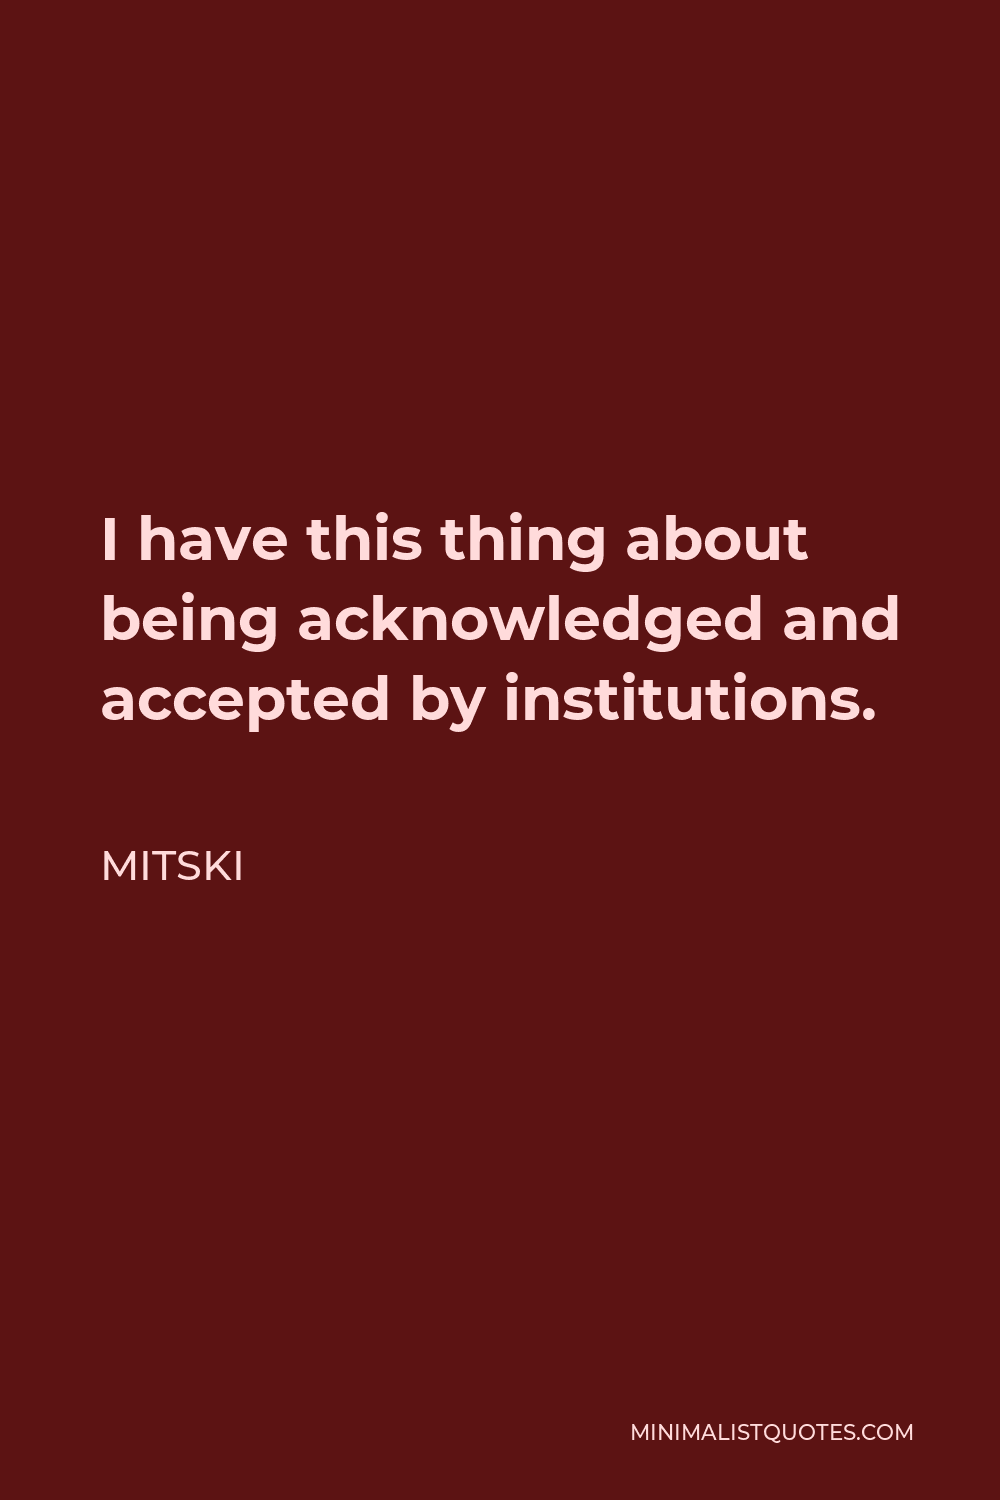 Mitski Quote - I have this thing about being acknowledged and accepted by institutions.